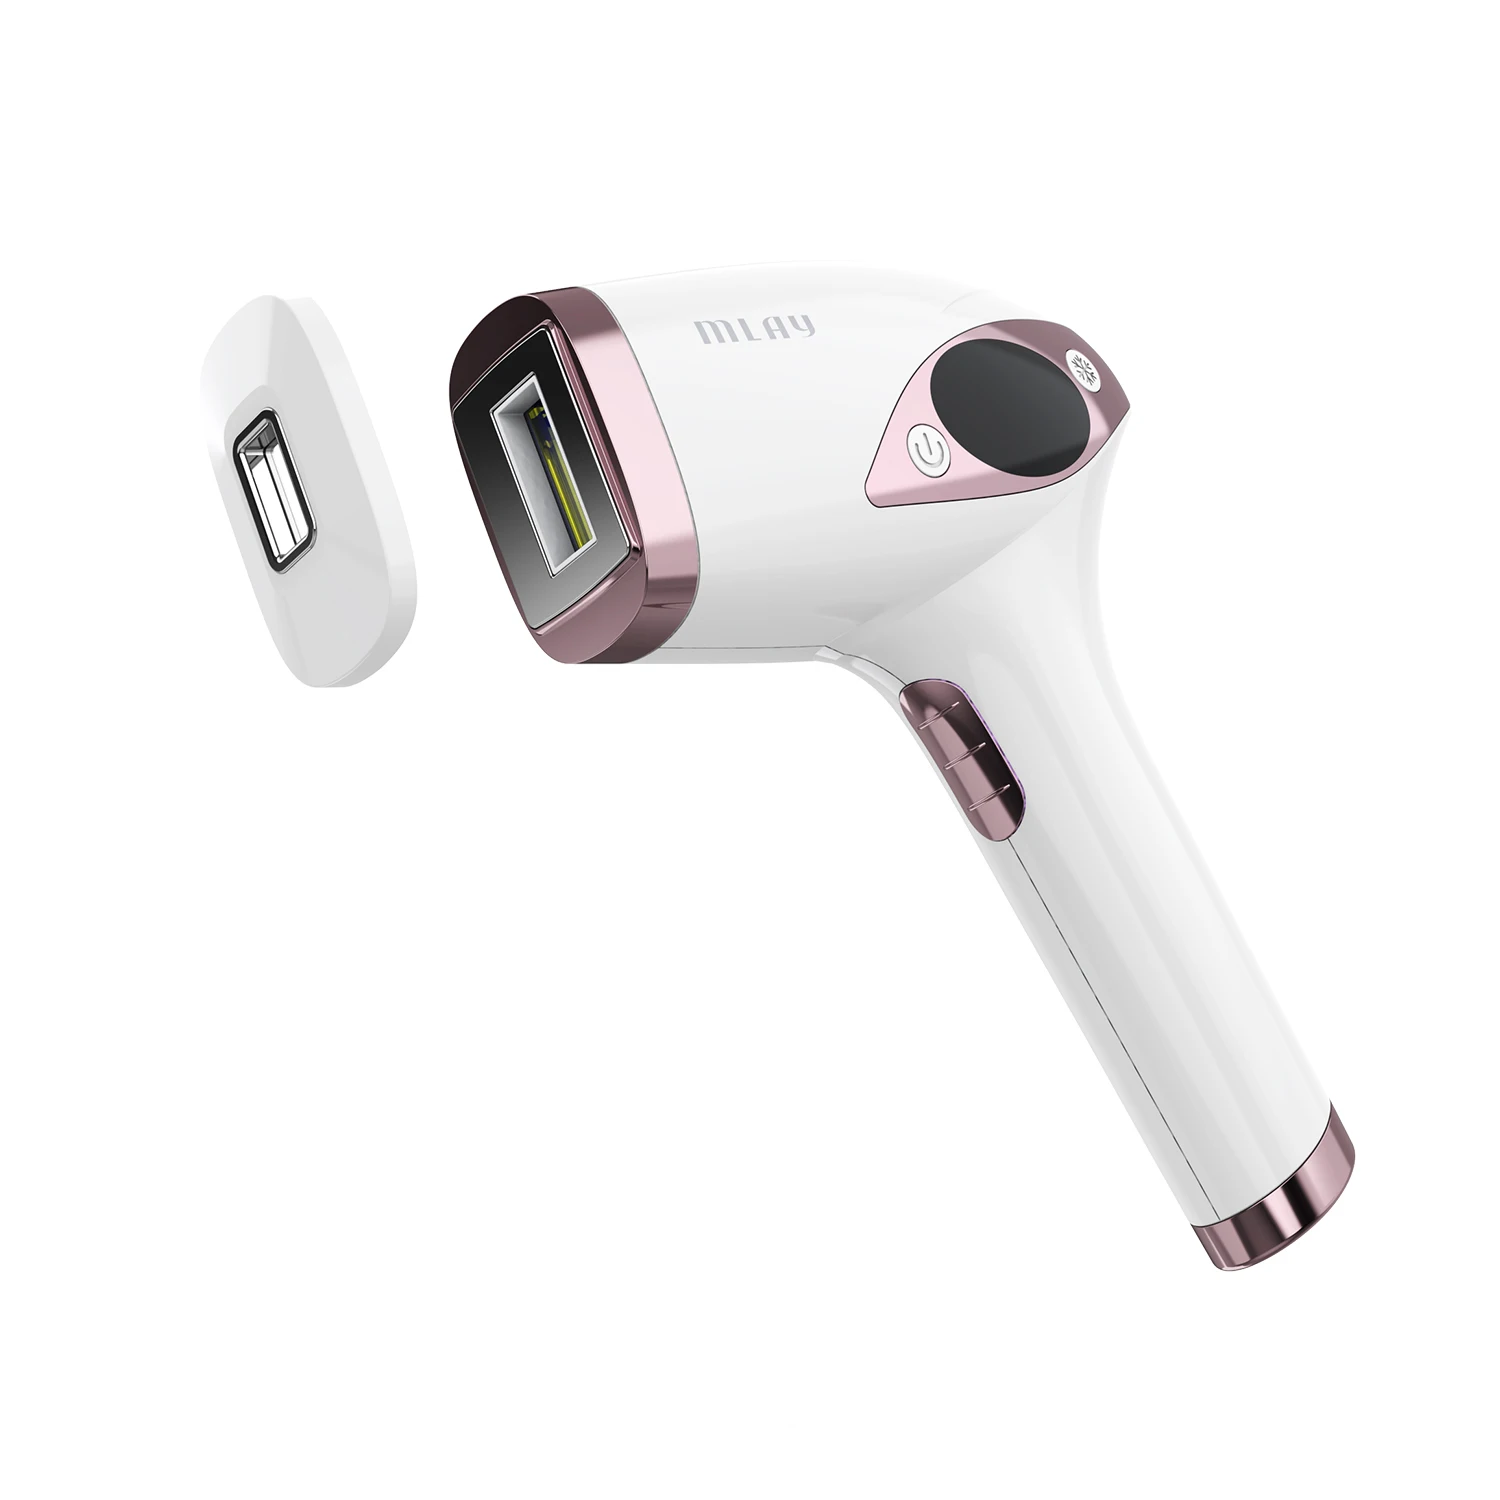 

Mlay T4 Home Use Painless Ice Cooling Ipl Hair Removal Laser Machine For Whole Body, White